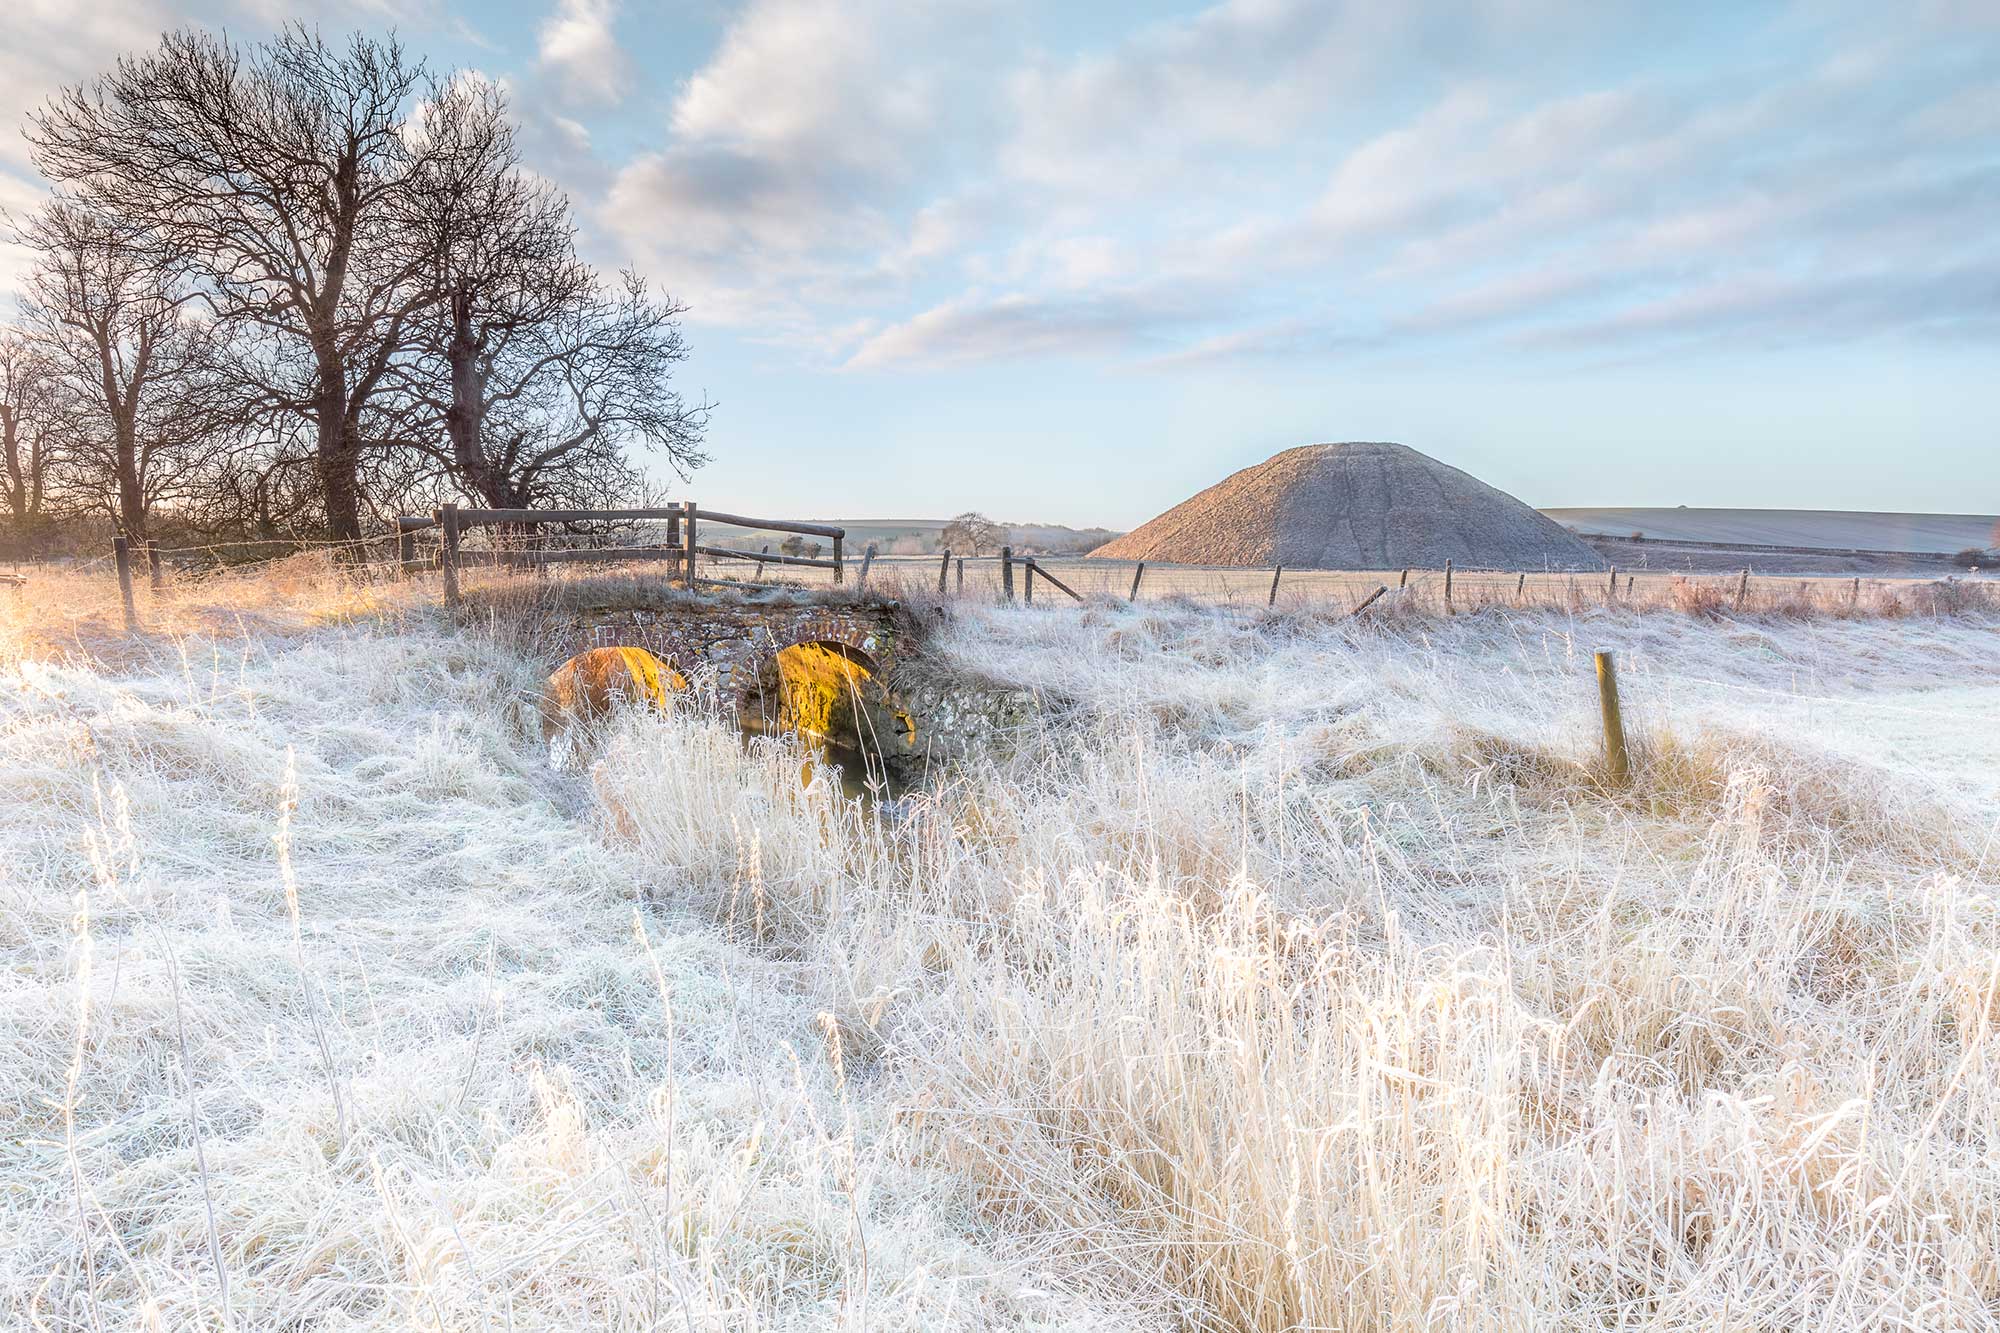 A photograph of a frosty countryside landscape, with a brick bridge in the foreground and a mound in the background.